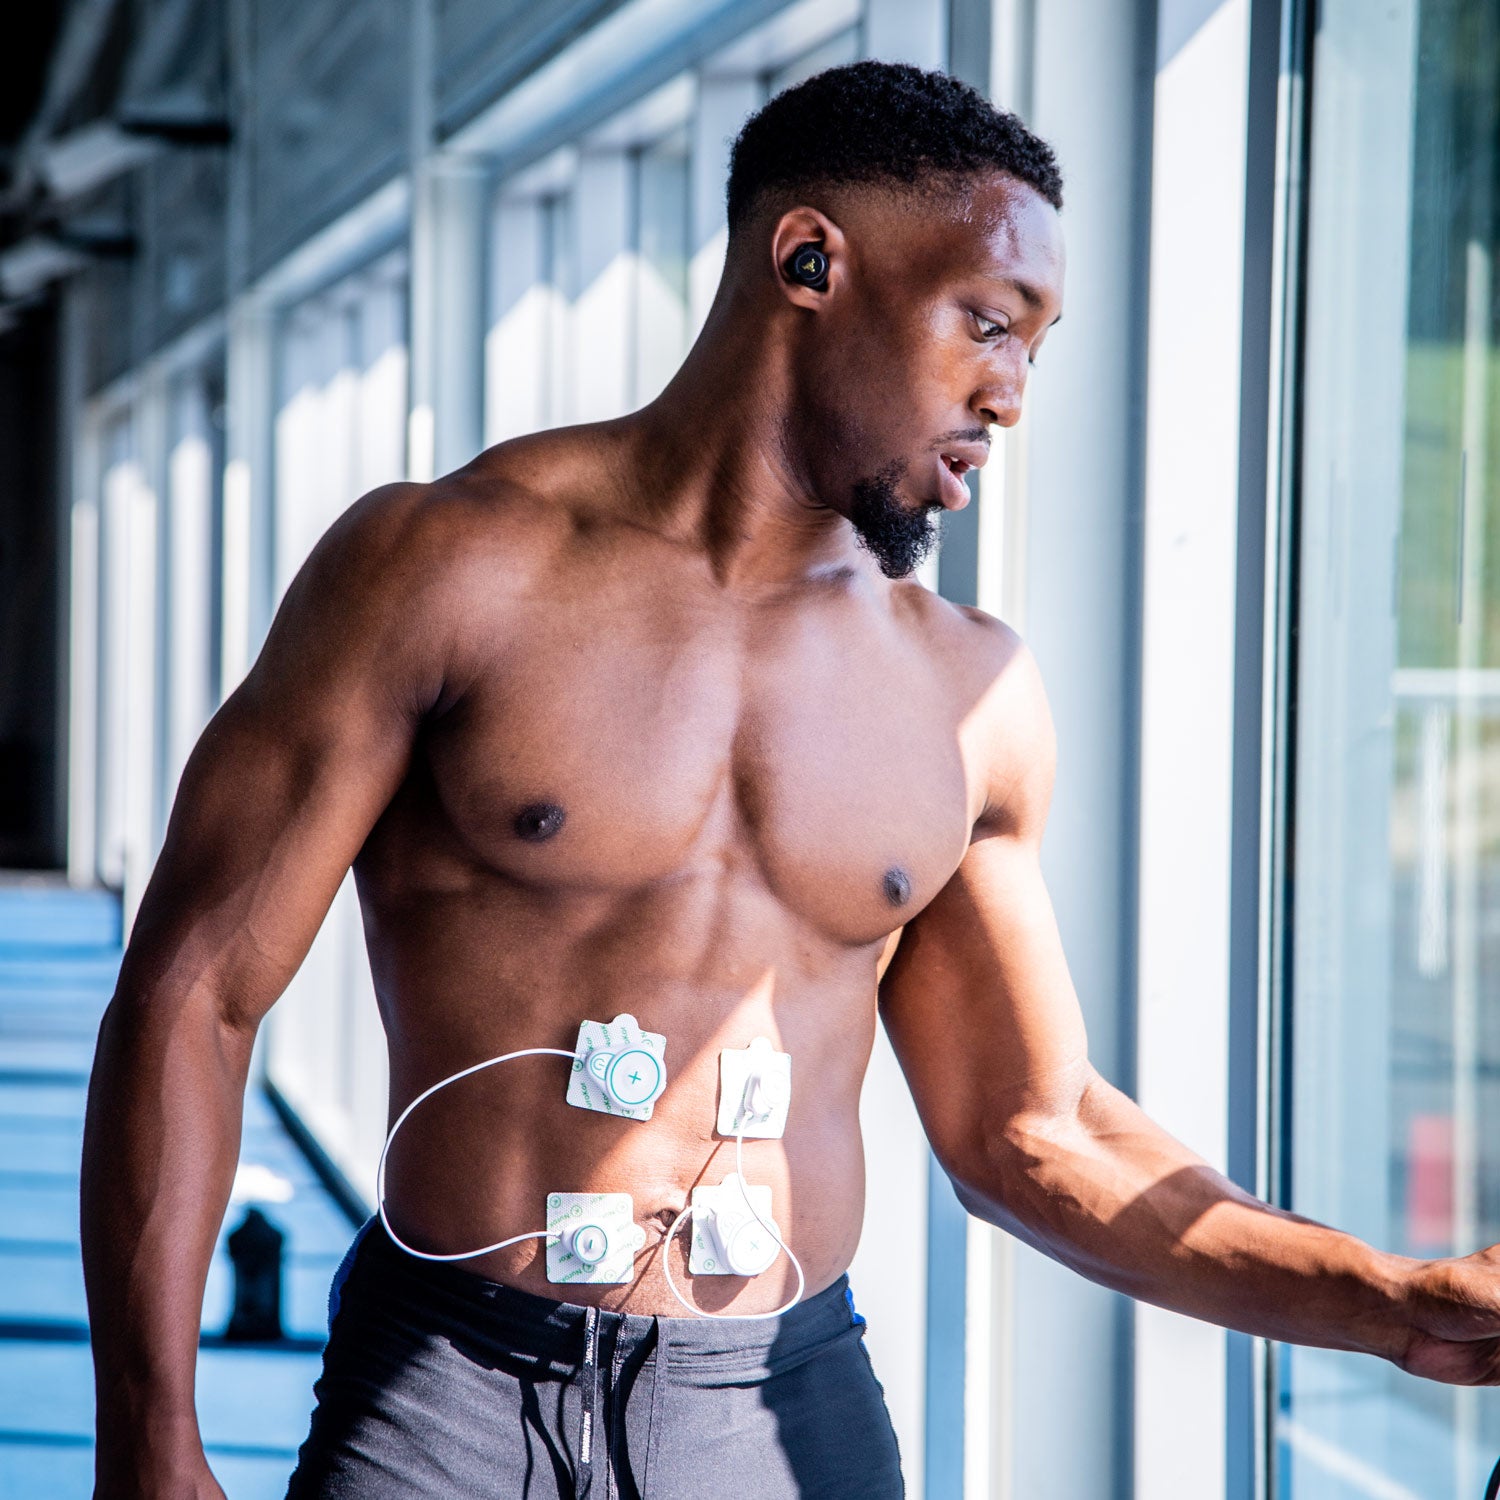 GB Bobsleigh team using nurokor mibody device for recovery on abdominal muscles